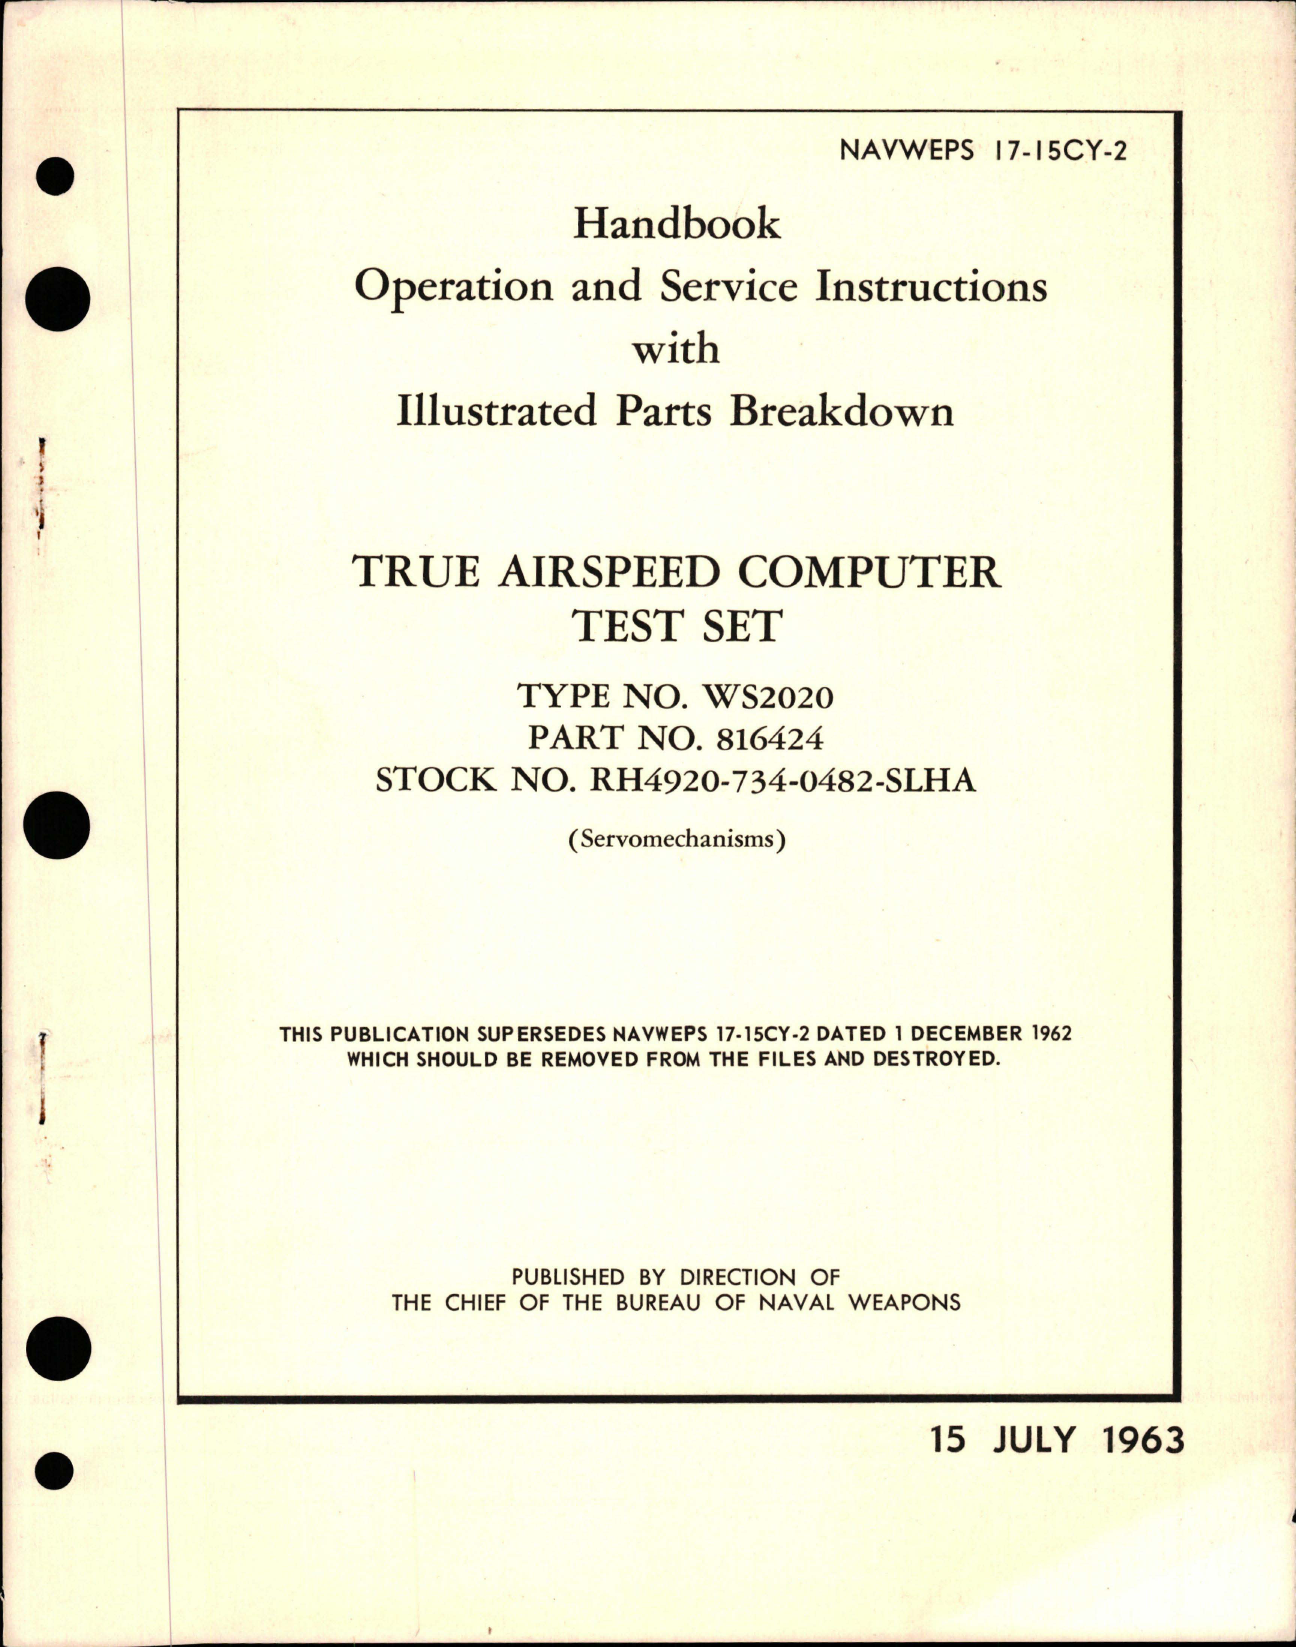 Sample page 1 from AirCorps Library document: Operation & Service Instructions with Illustrated Parts for True Airspeed Computer Test Set - Type WS2020 - Part 816424